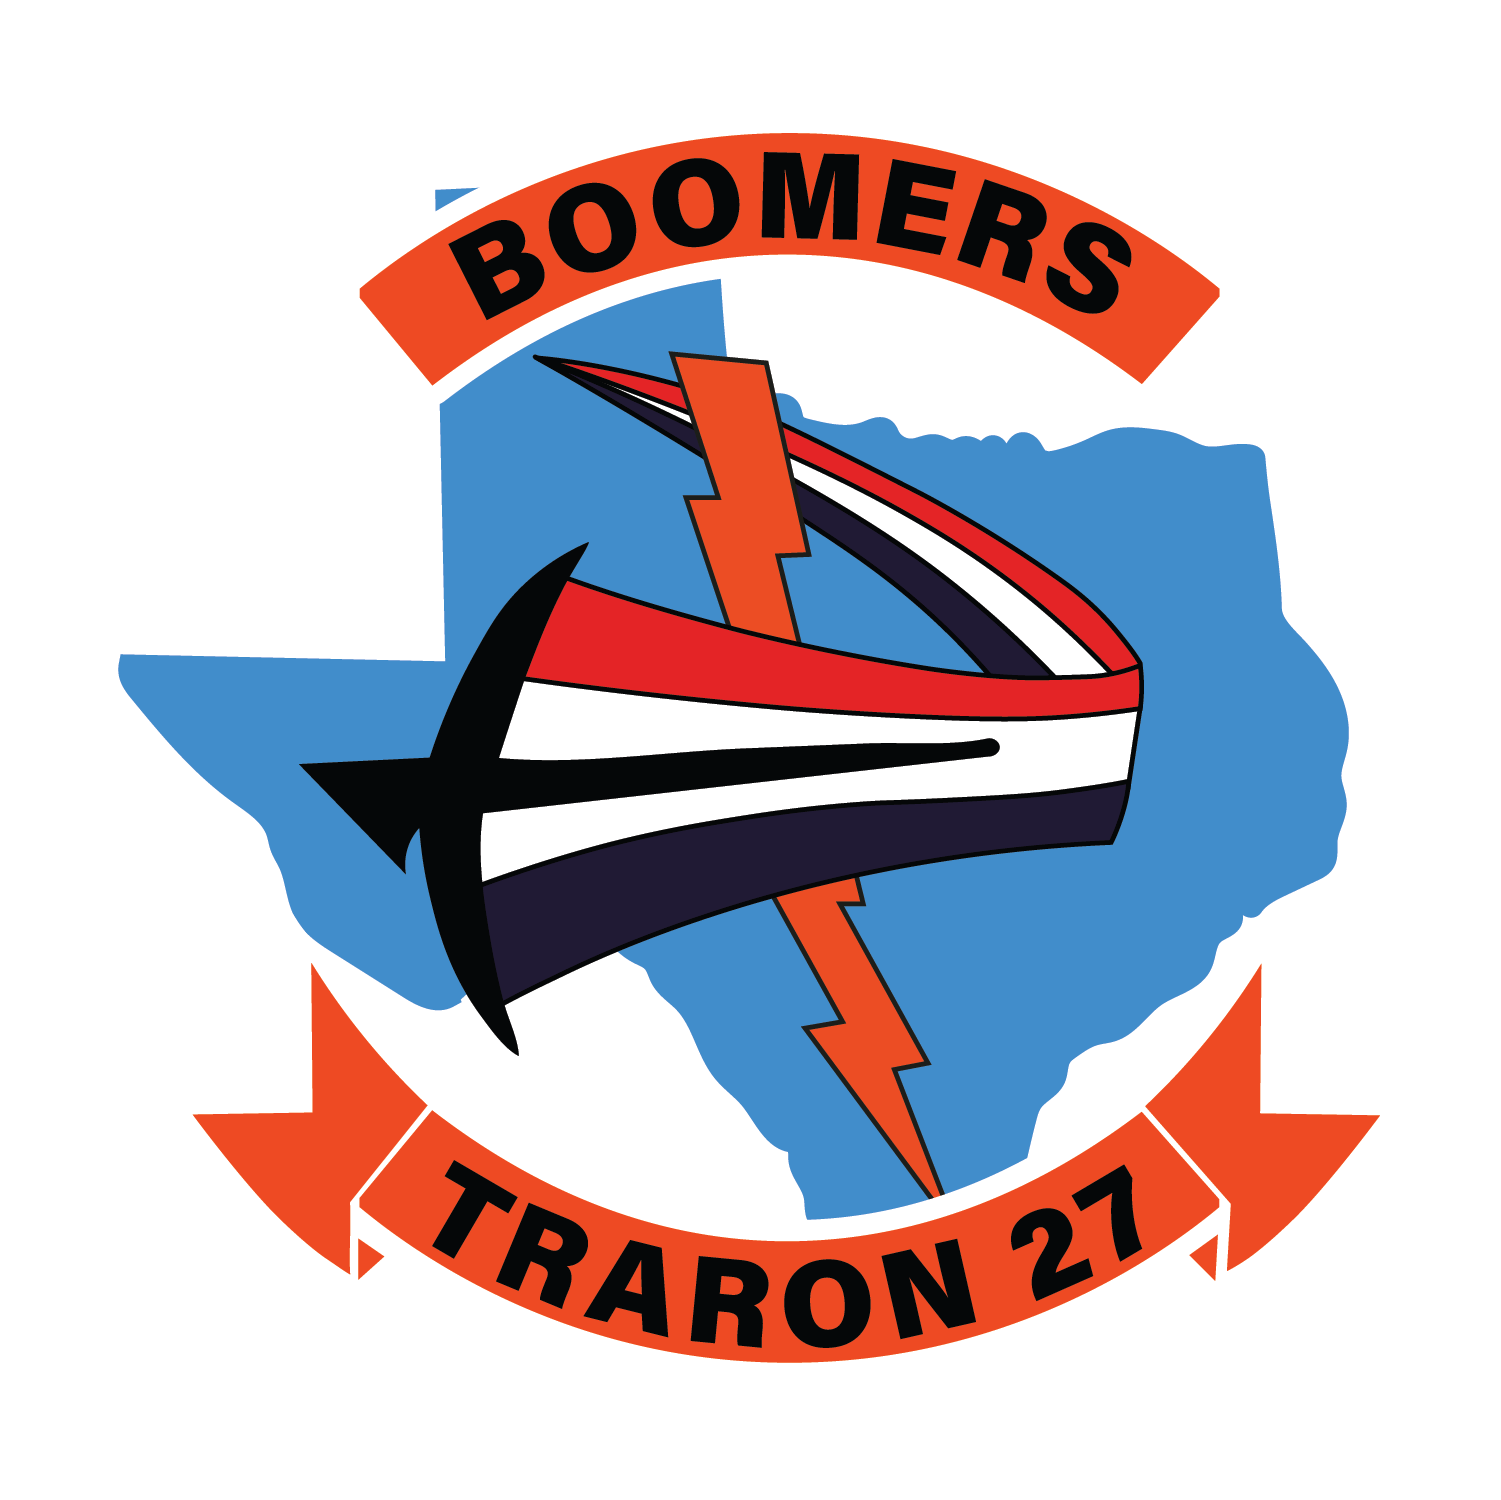 VT-27 "Boomers"